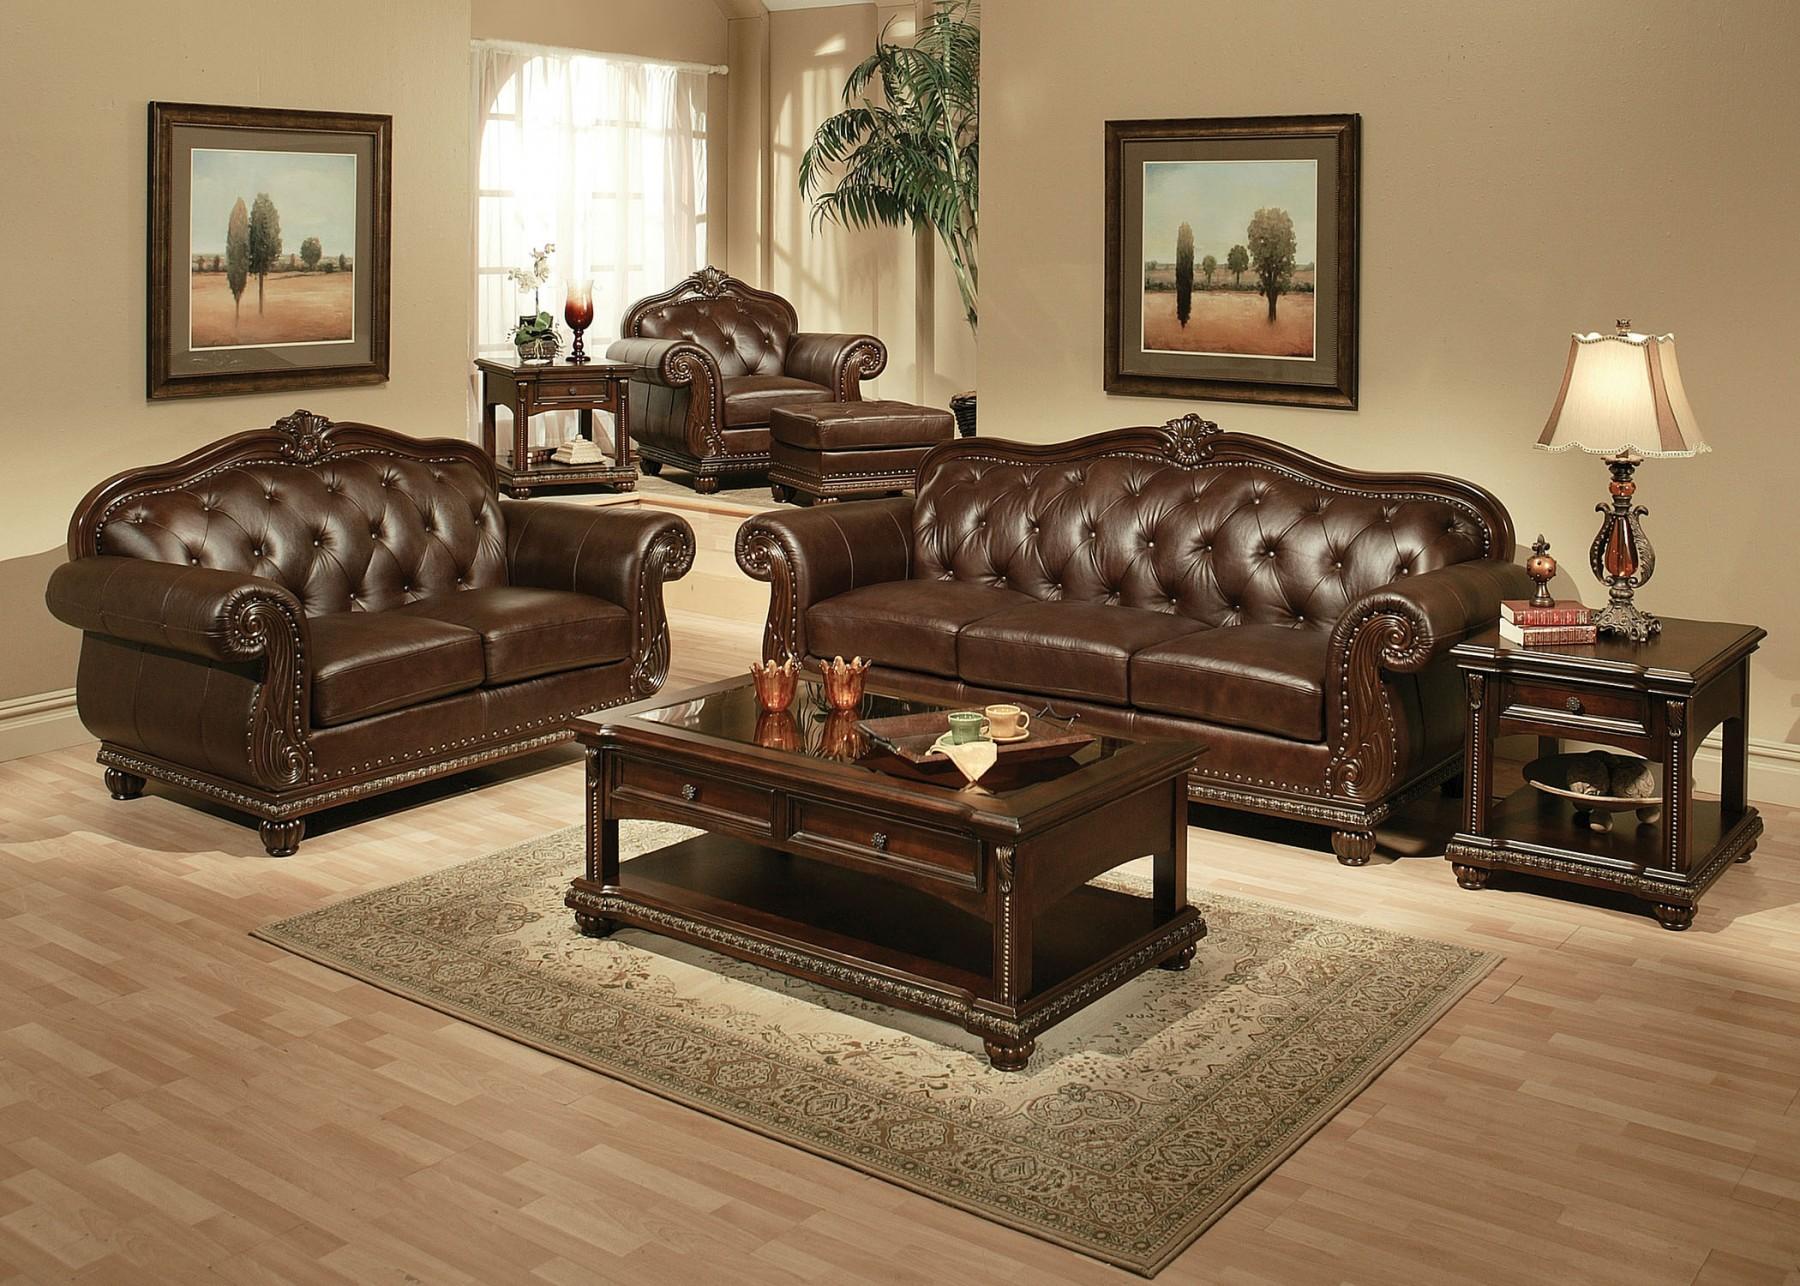 Classic, Traditional Sofa Loveseat and Chair Set Anondale 15030 Set 15030 Anondale-Set-3 in Cherry, Espresso Top grain leather